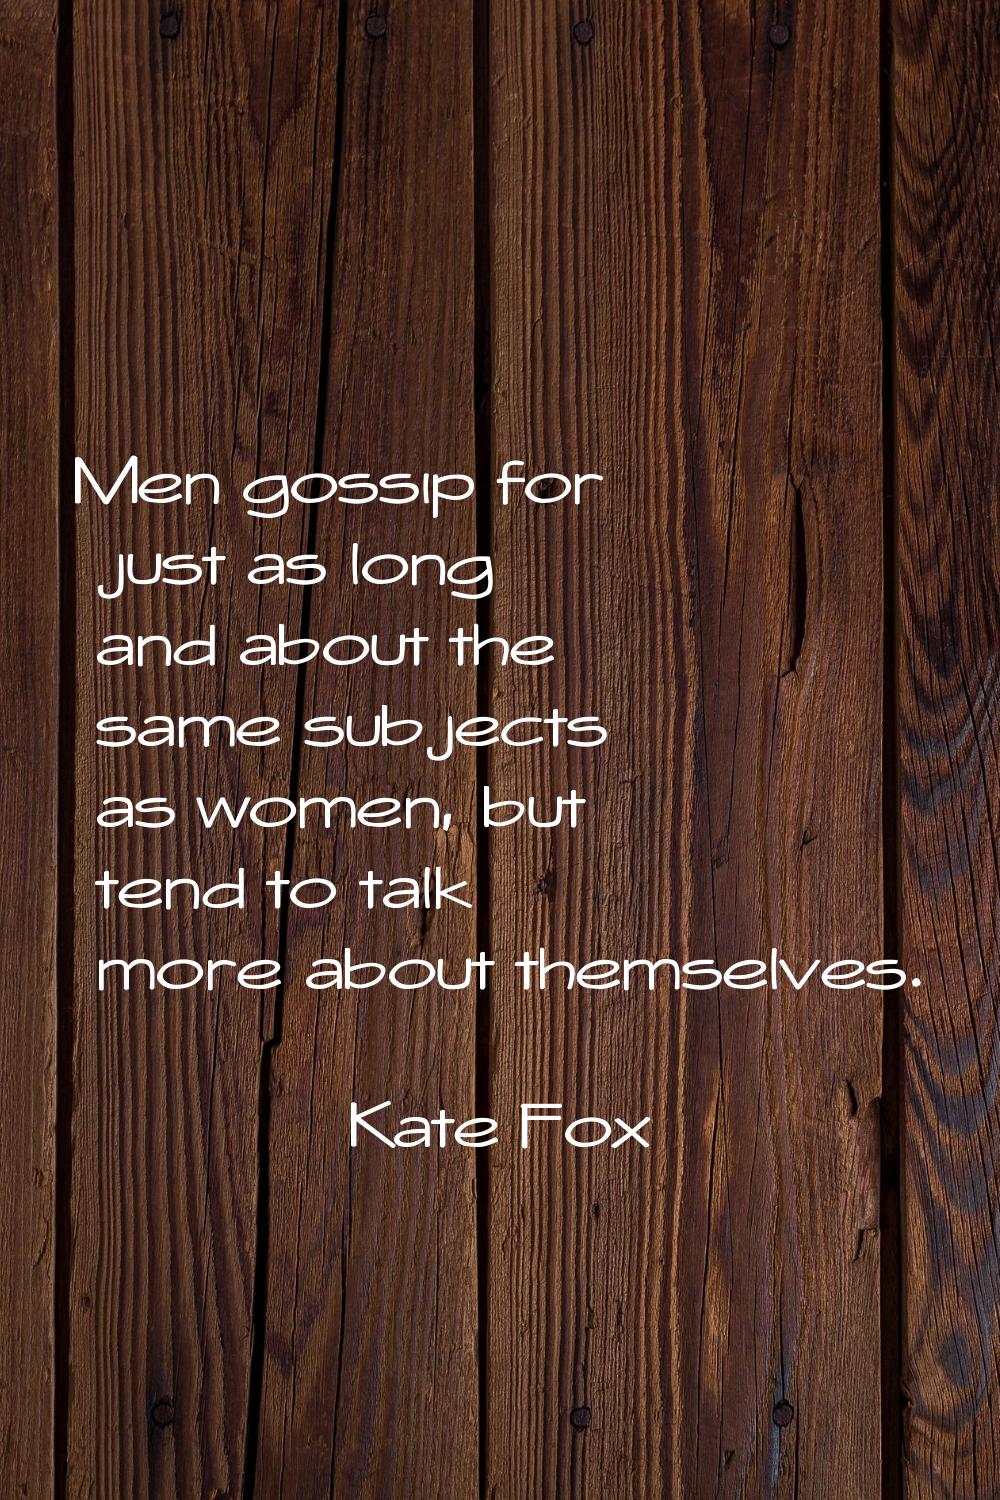 Men gossip for just as long and about the same subjects as women, but tend to talk more about thems